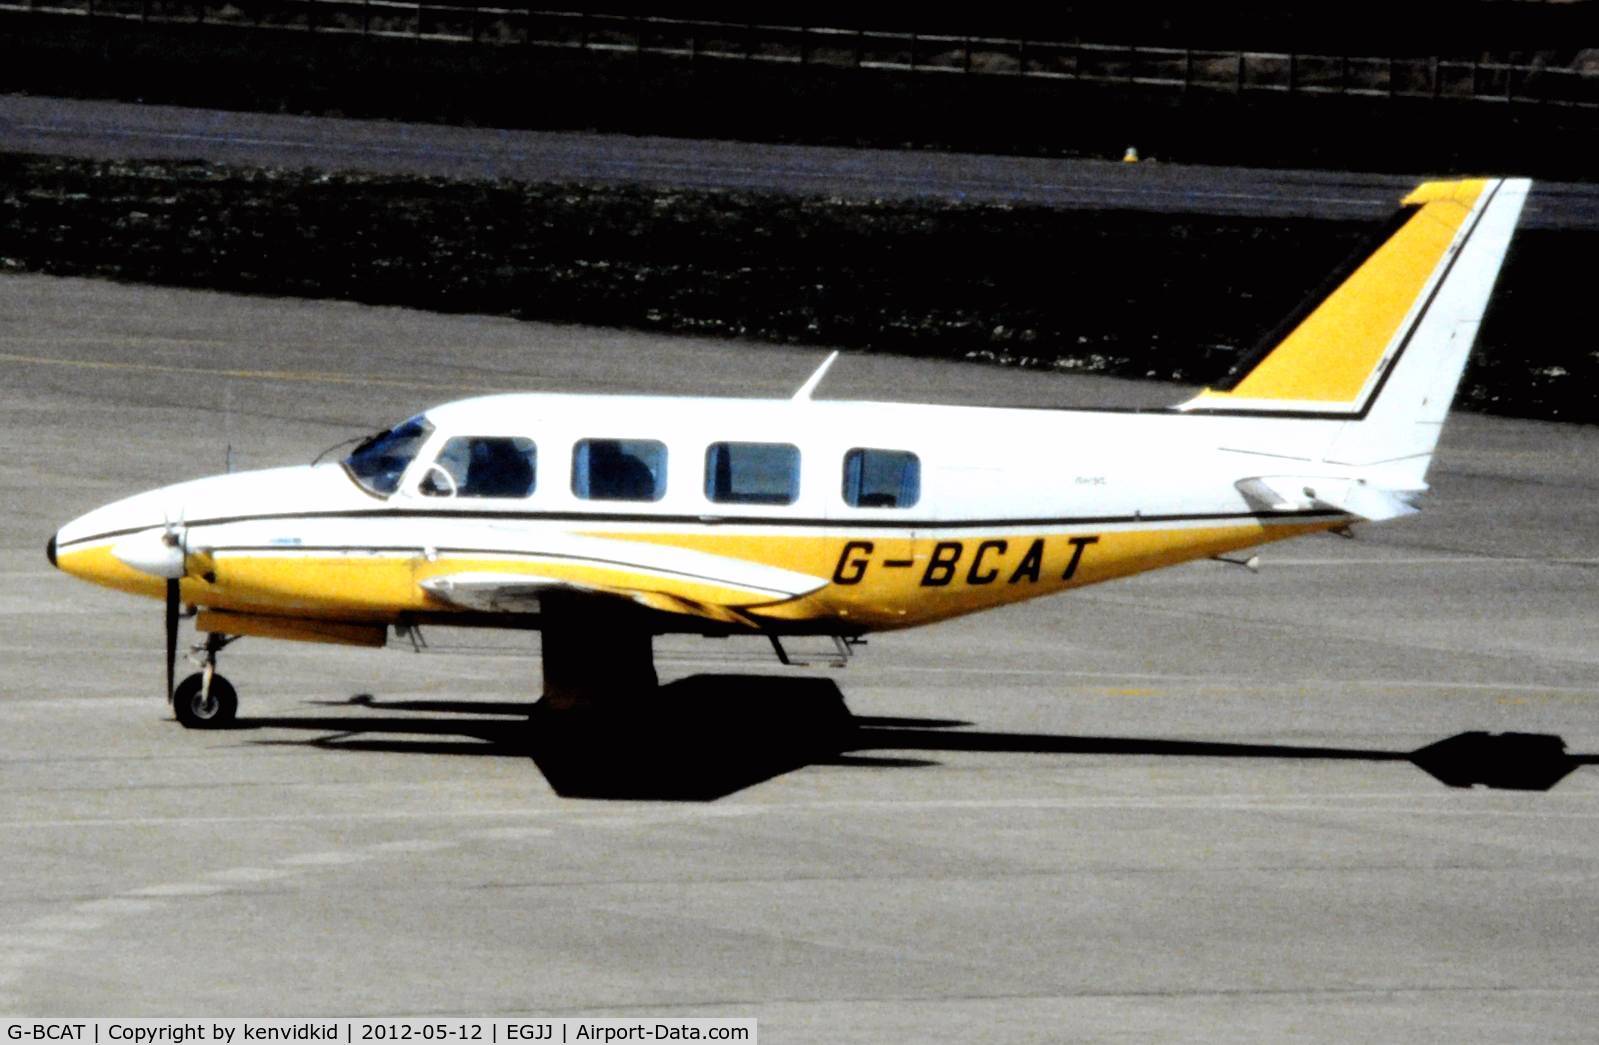 G-BCAT, 1974 Piper PA-31-310 Navajo Navajo C/N 31-7401222, At Jersey airport early 1970's.
Scanned from slide.